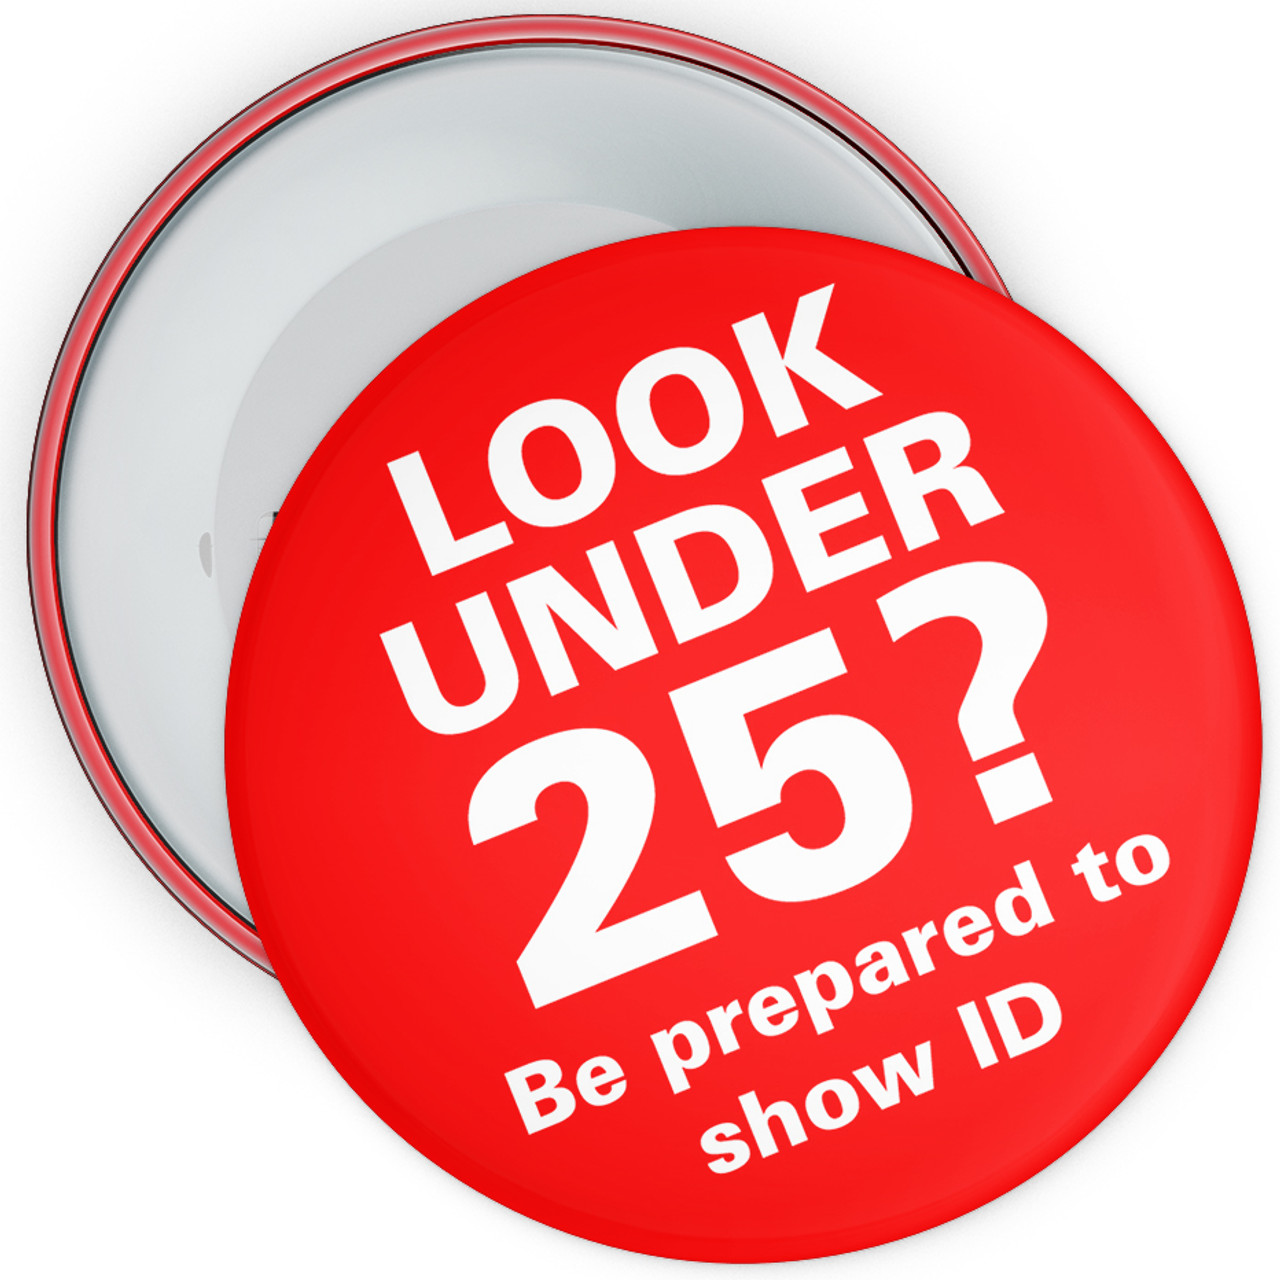 Red Challenge 25 Badge - Look Under 25? - The Badge Centre ®